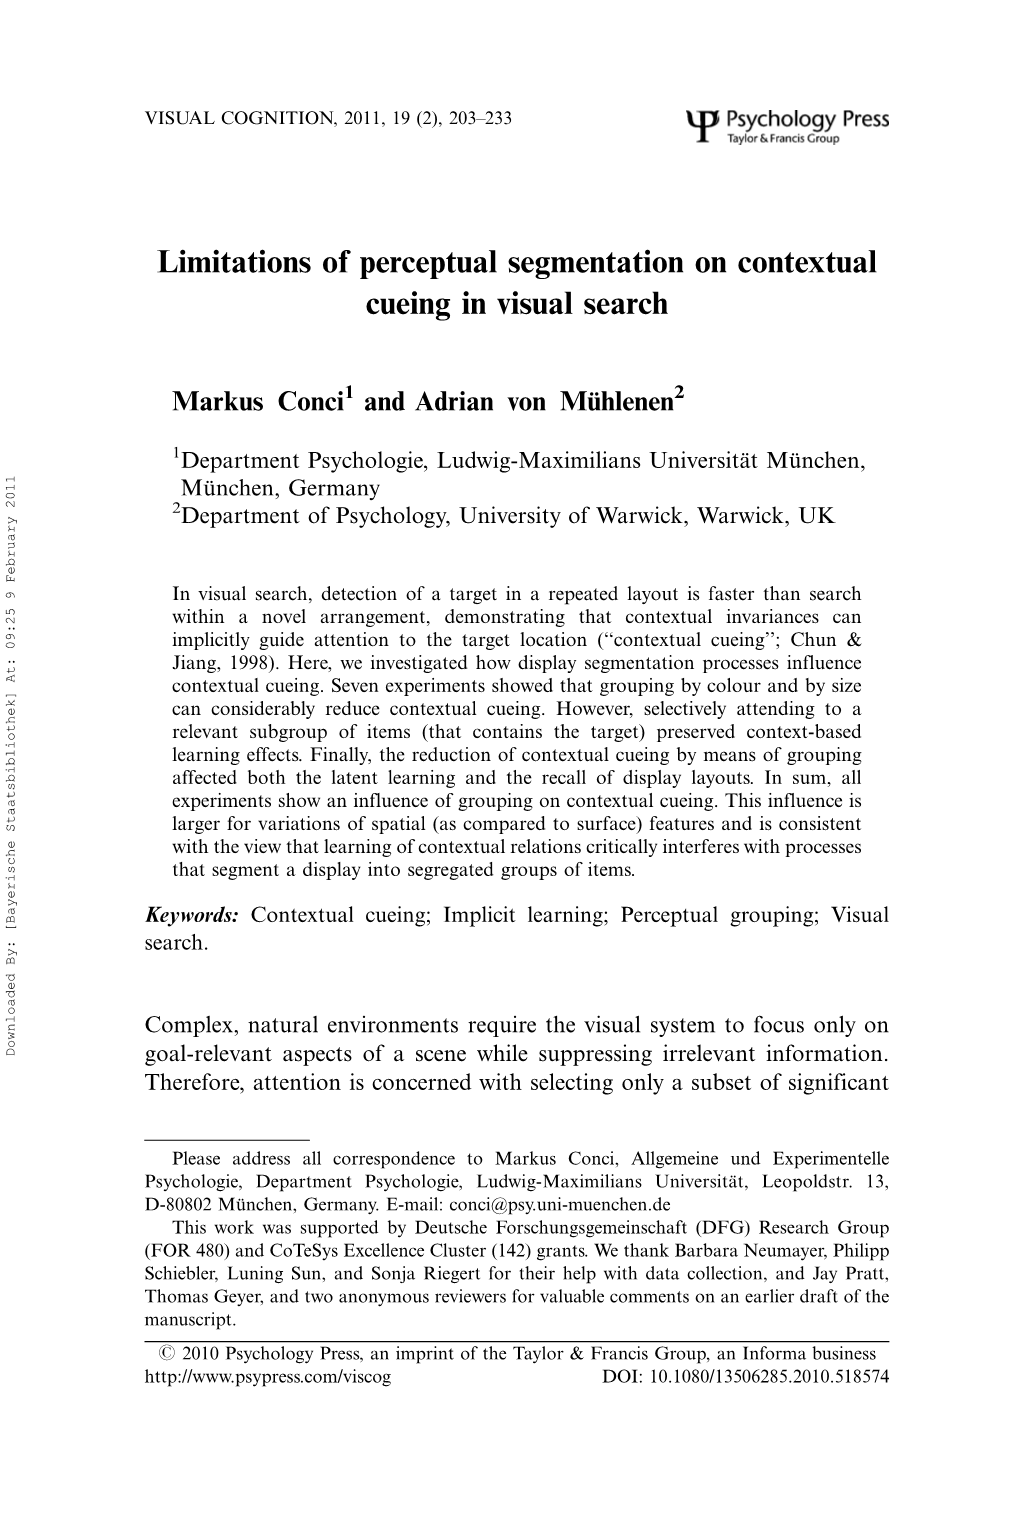 Limitations of Perceptual Segmentation on Contextual Cueing in Visual Search